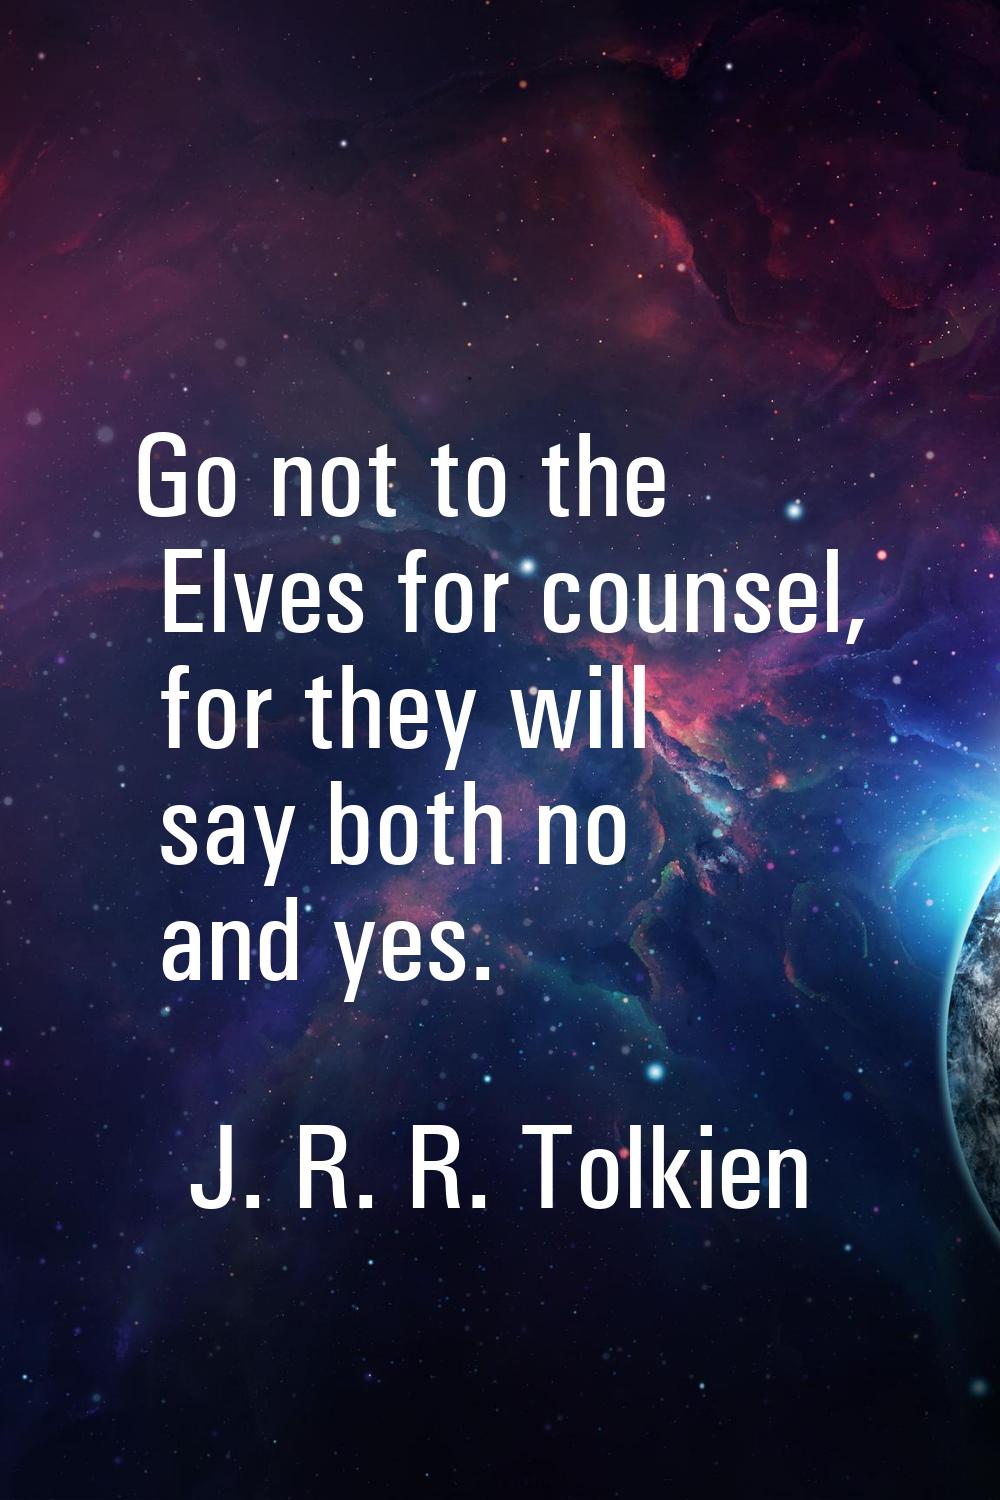 Go not to the Elves for counsel, for they will say both no and yes.